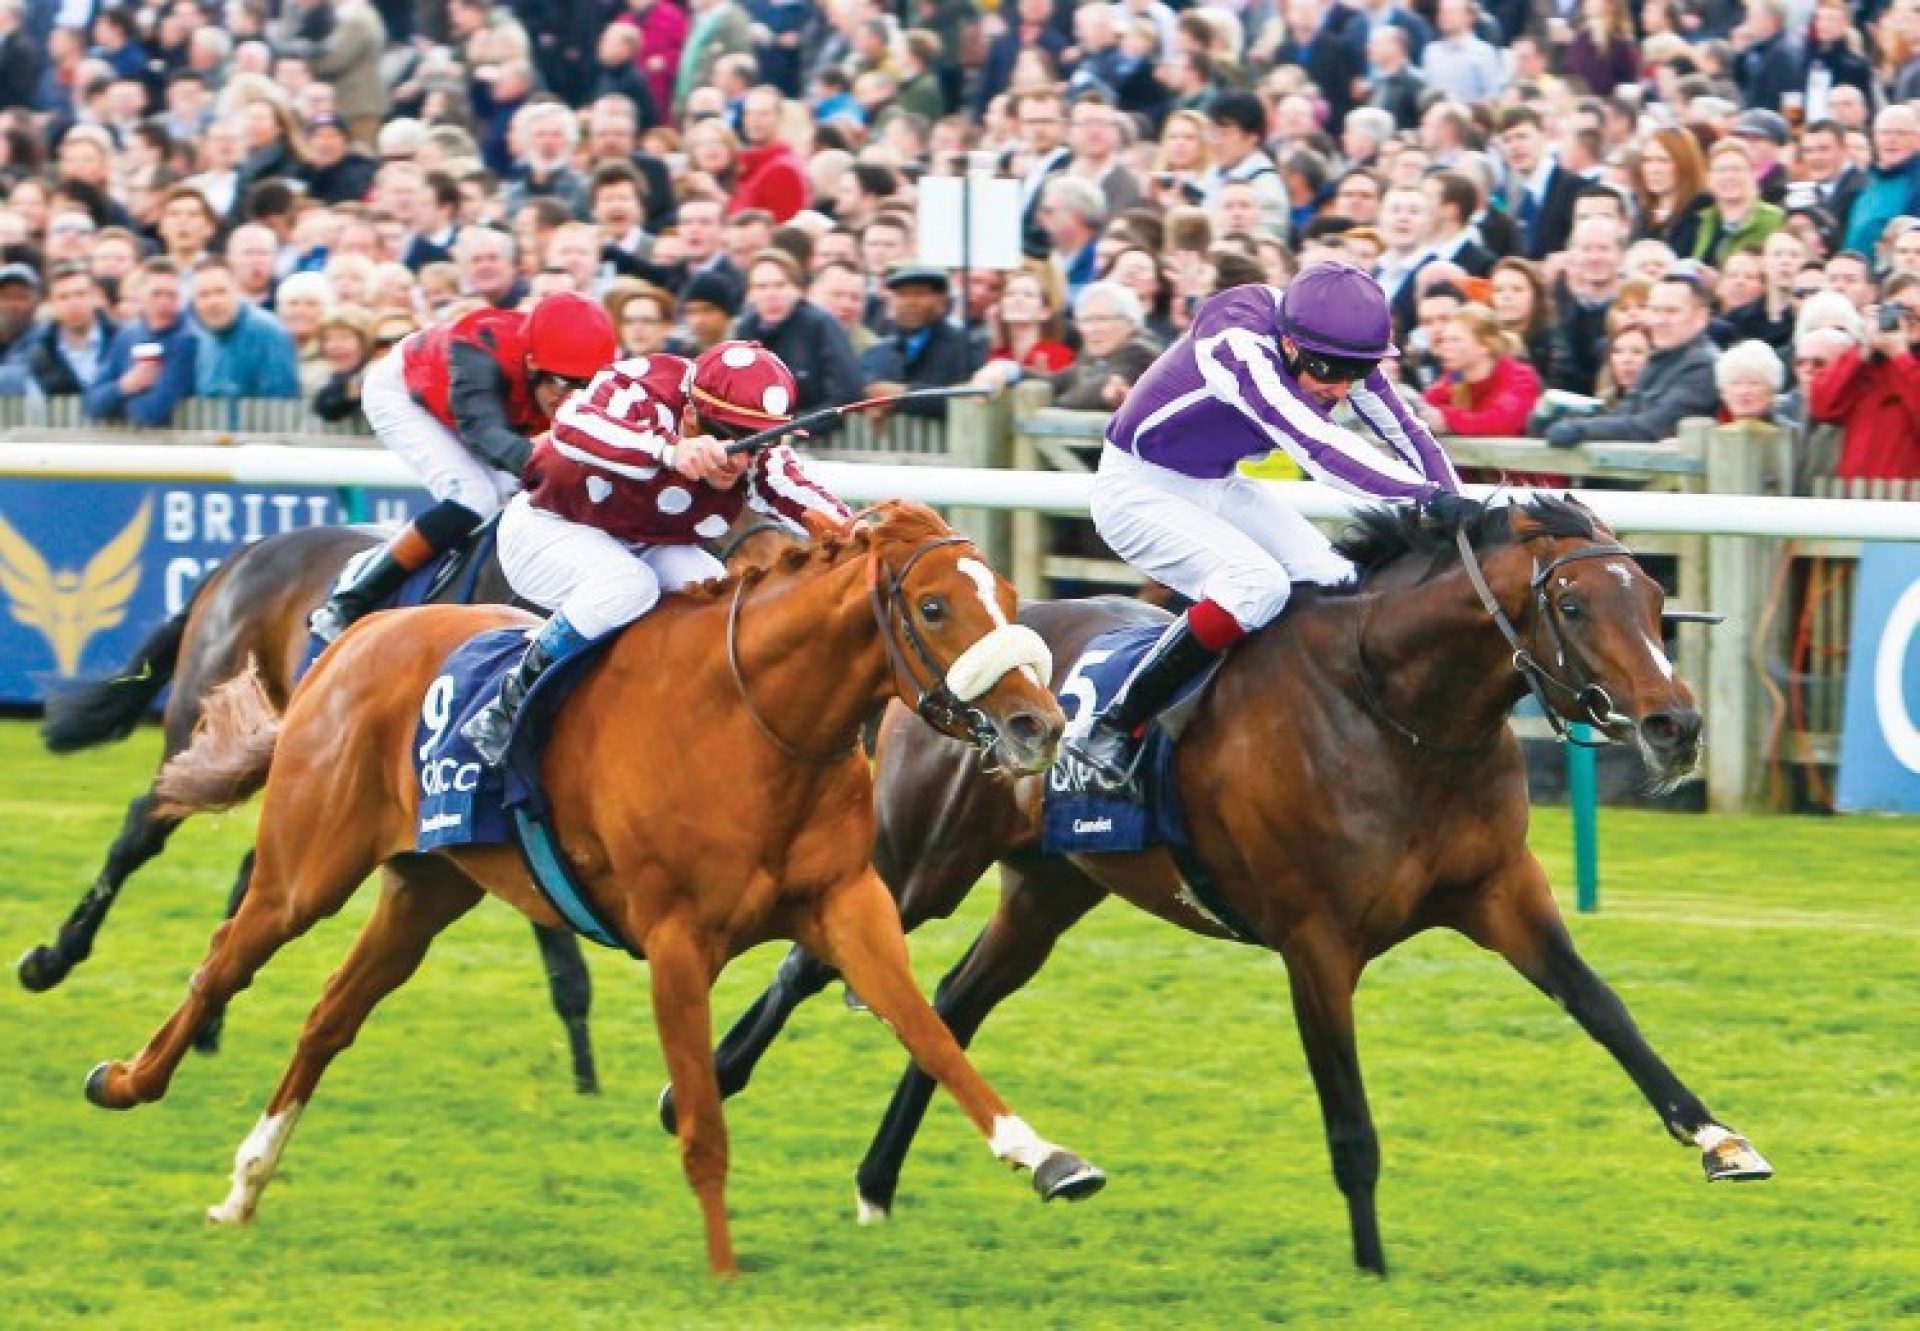 Camelot winning the G1 2,000 Guineas at Newmarket